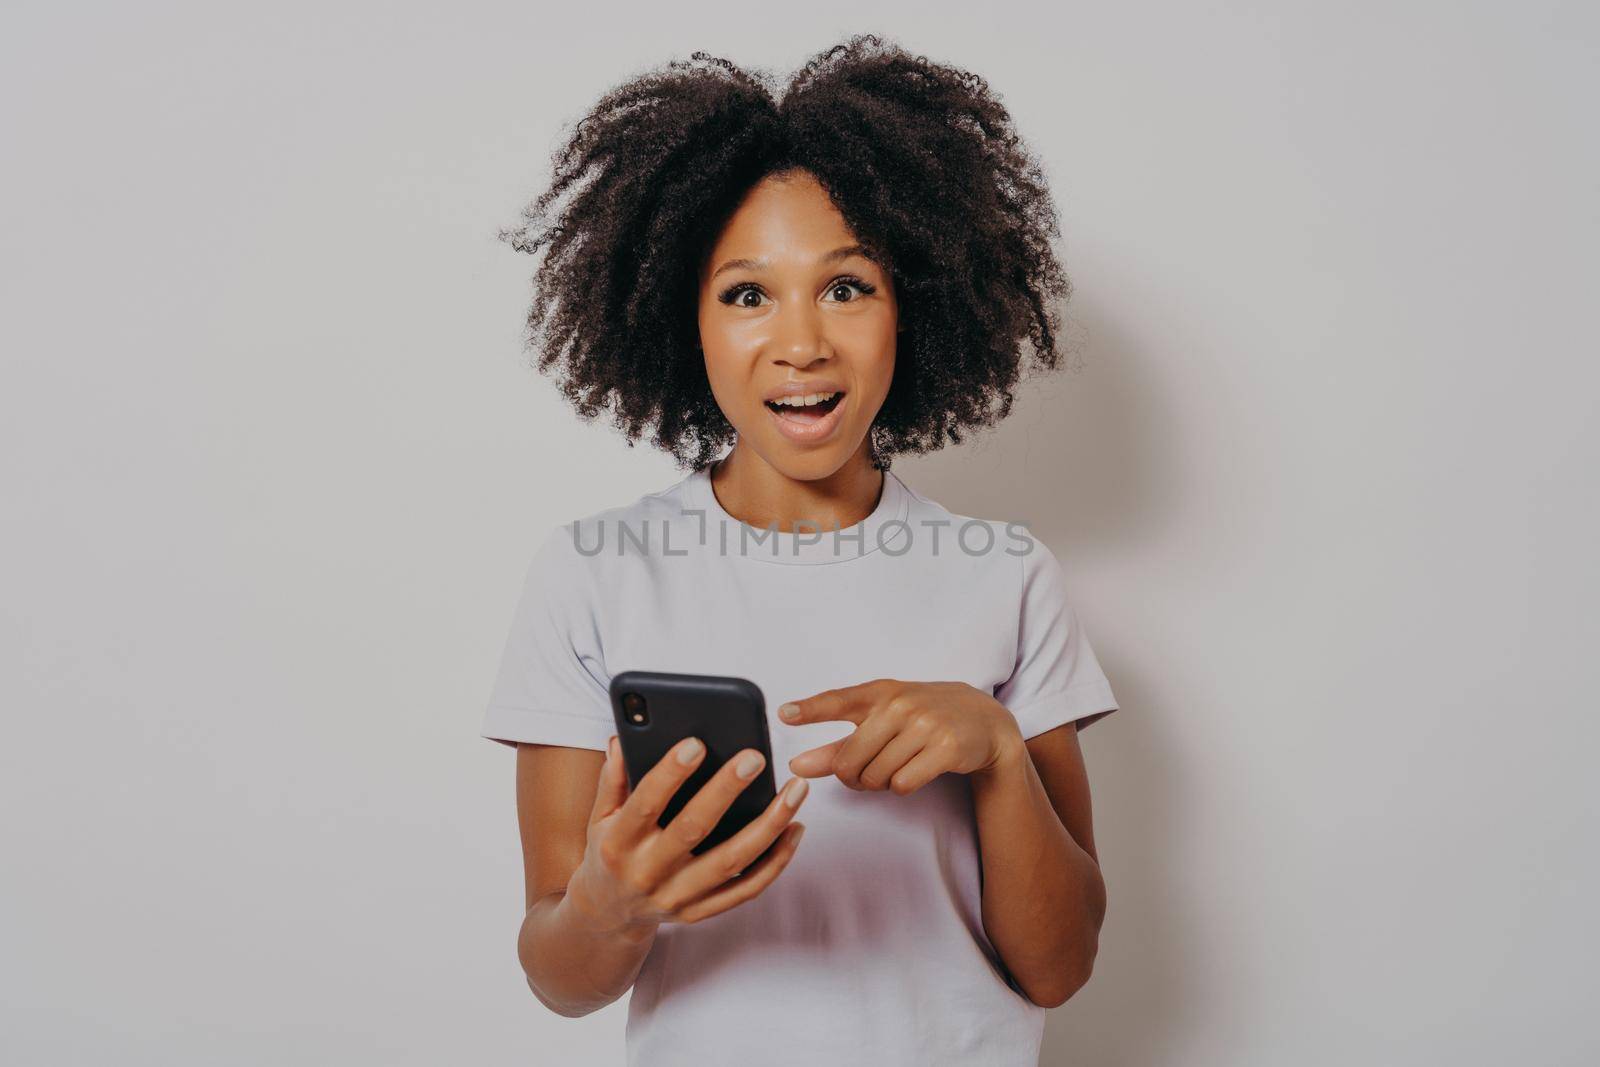 Excited happy dark skinned lady with curly hair holding mobile phone by vkstock